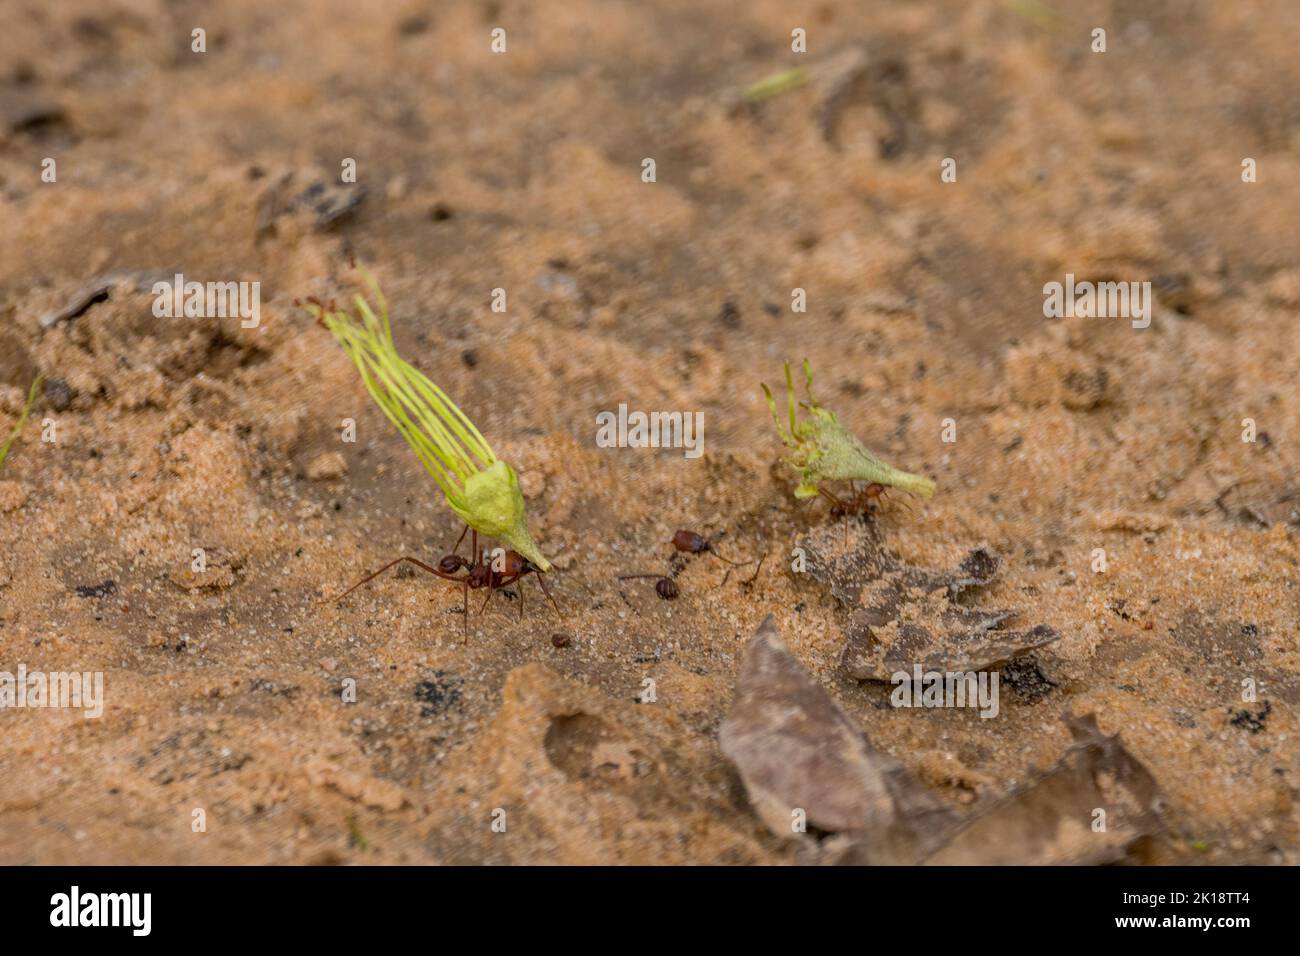 Leafcutter ants carrying plant material to their nest near the Piuval Lodge in the Northern Pantanal, State of Mato Grosso, Brazil. Stock Photo